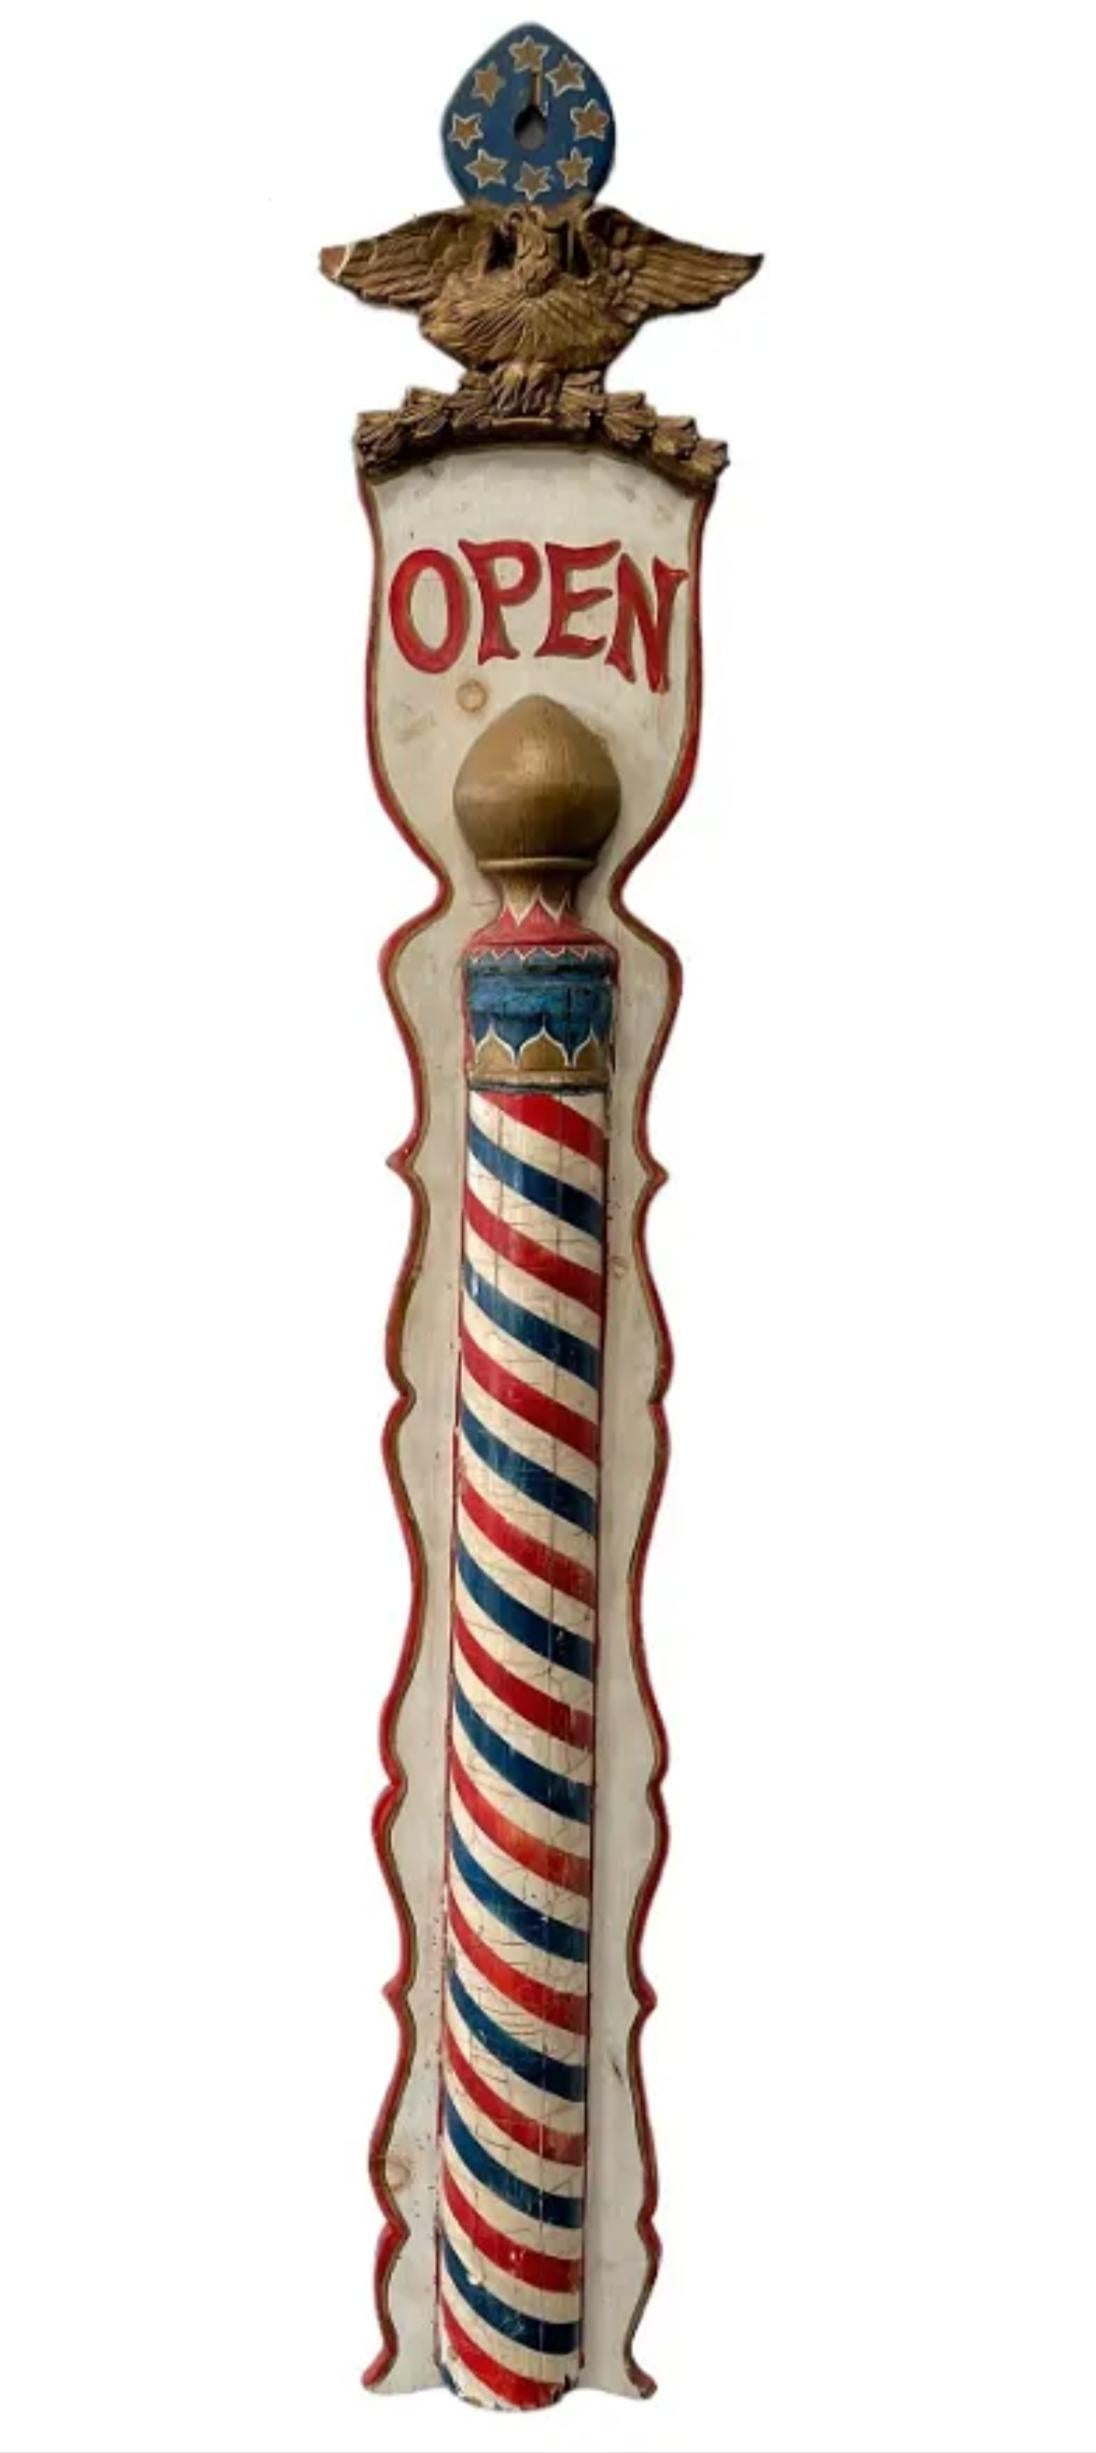 A rare, likely one-of-a-kind, large antique, circa 1860s, early American hand carved, painted, and sculpted wooden patriotic barber pole advertising trade sign / open sign. 

Mid-19th century, Southern United States, surmounted by stylized eight